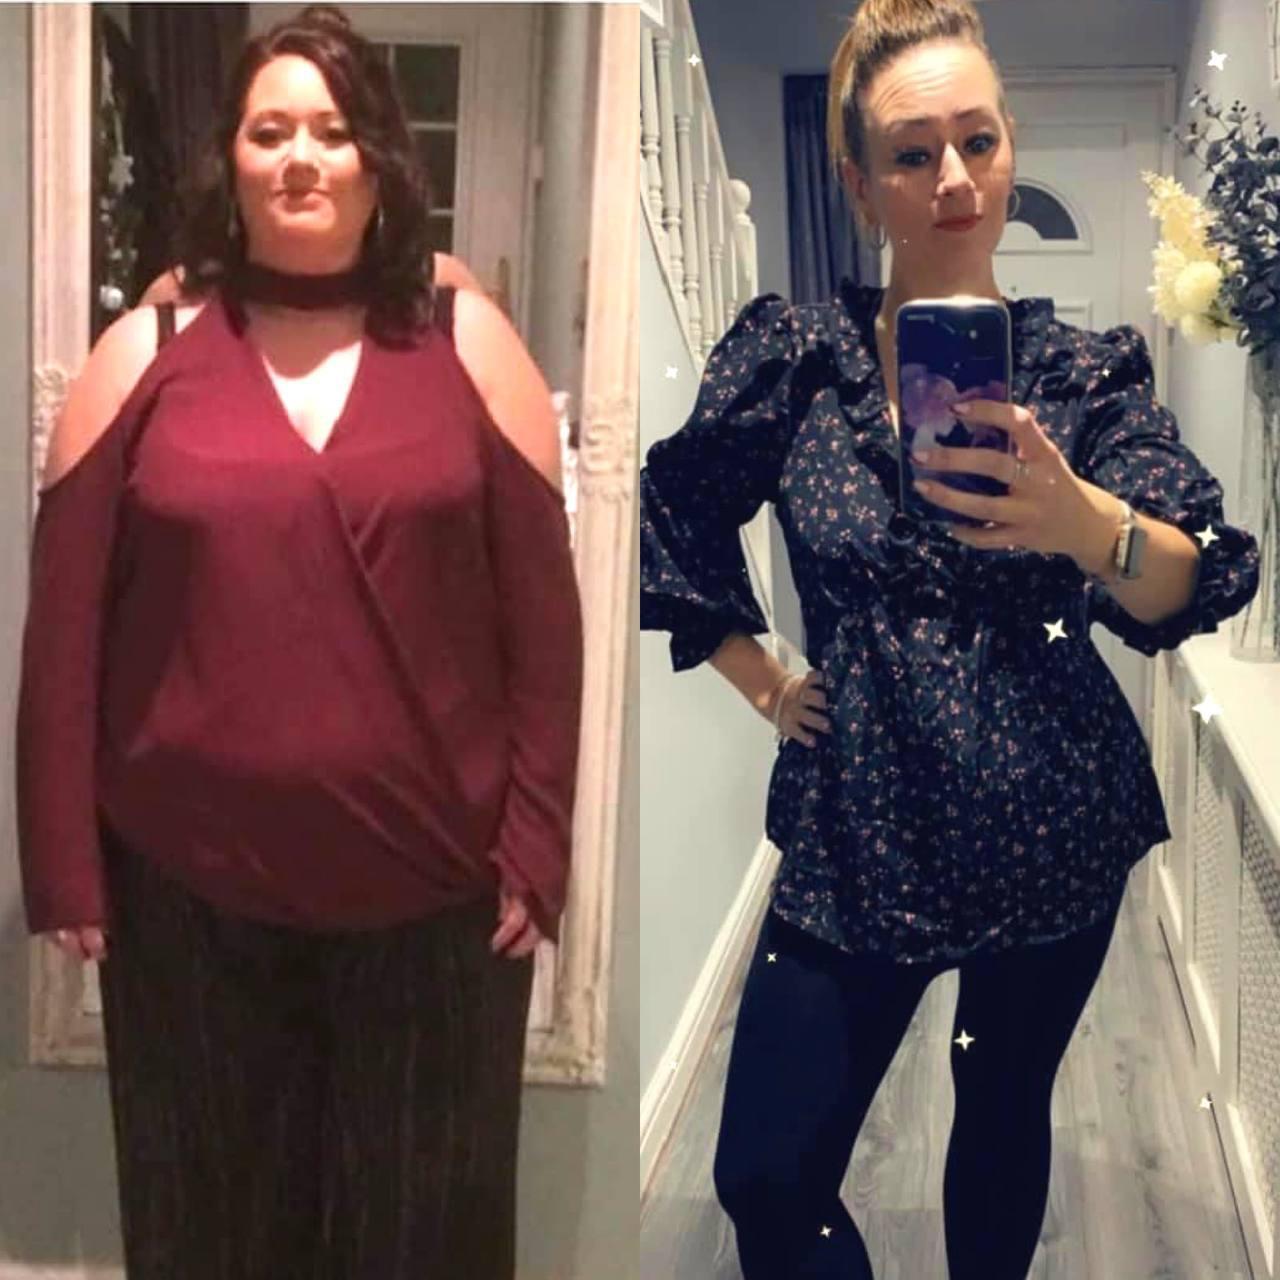 At 18 stone, Gemma Williams wanted to drop a few dress sizes